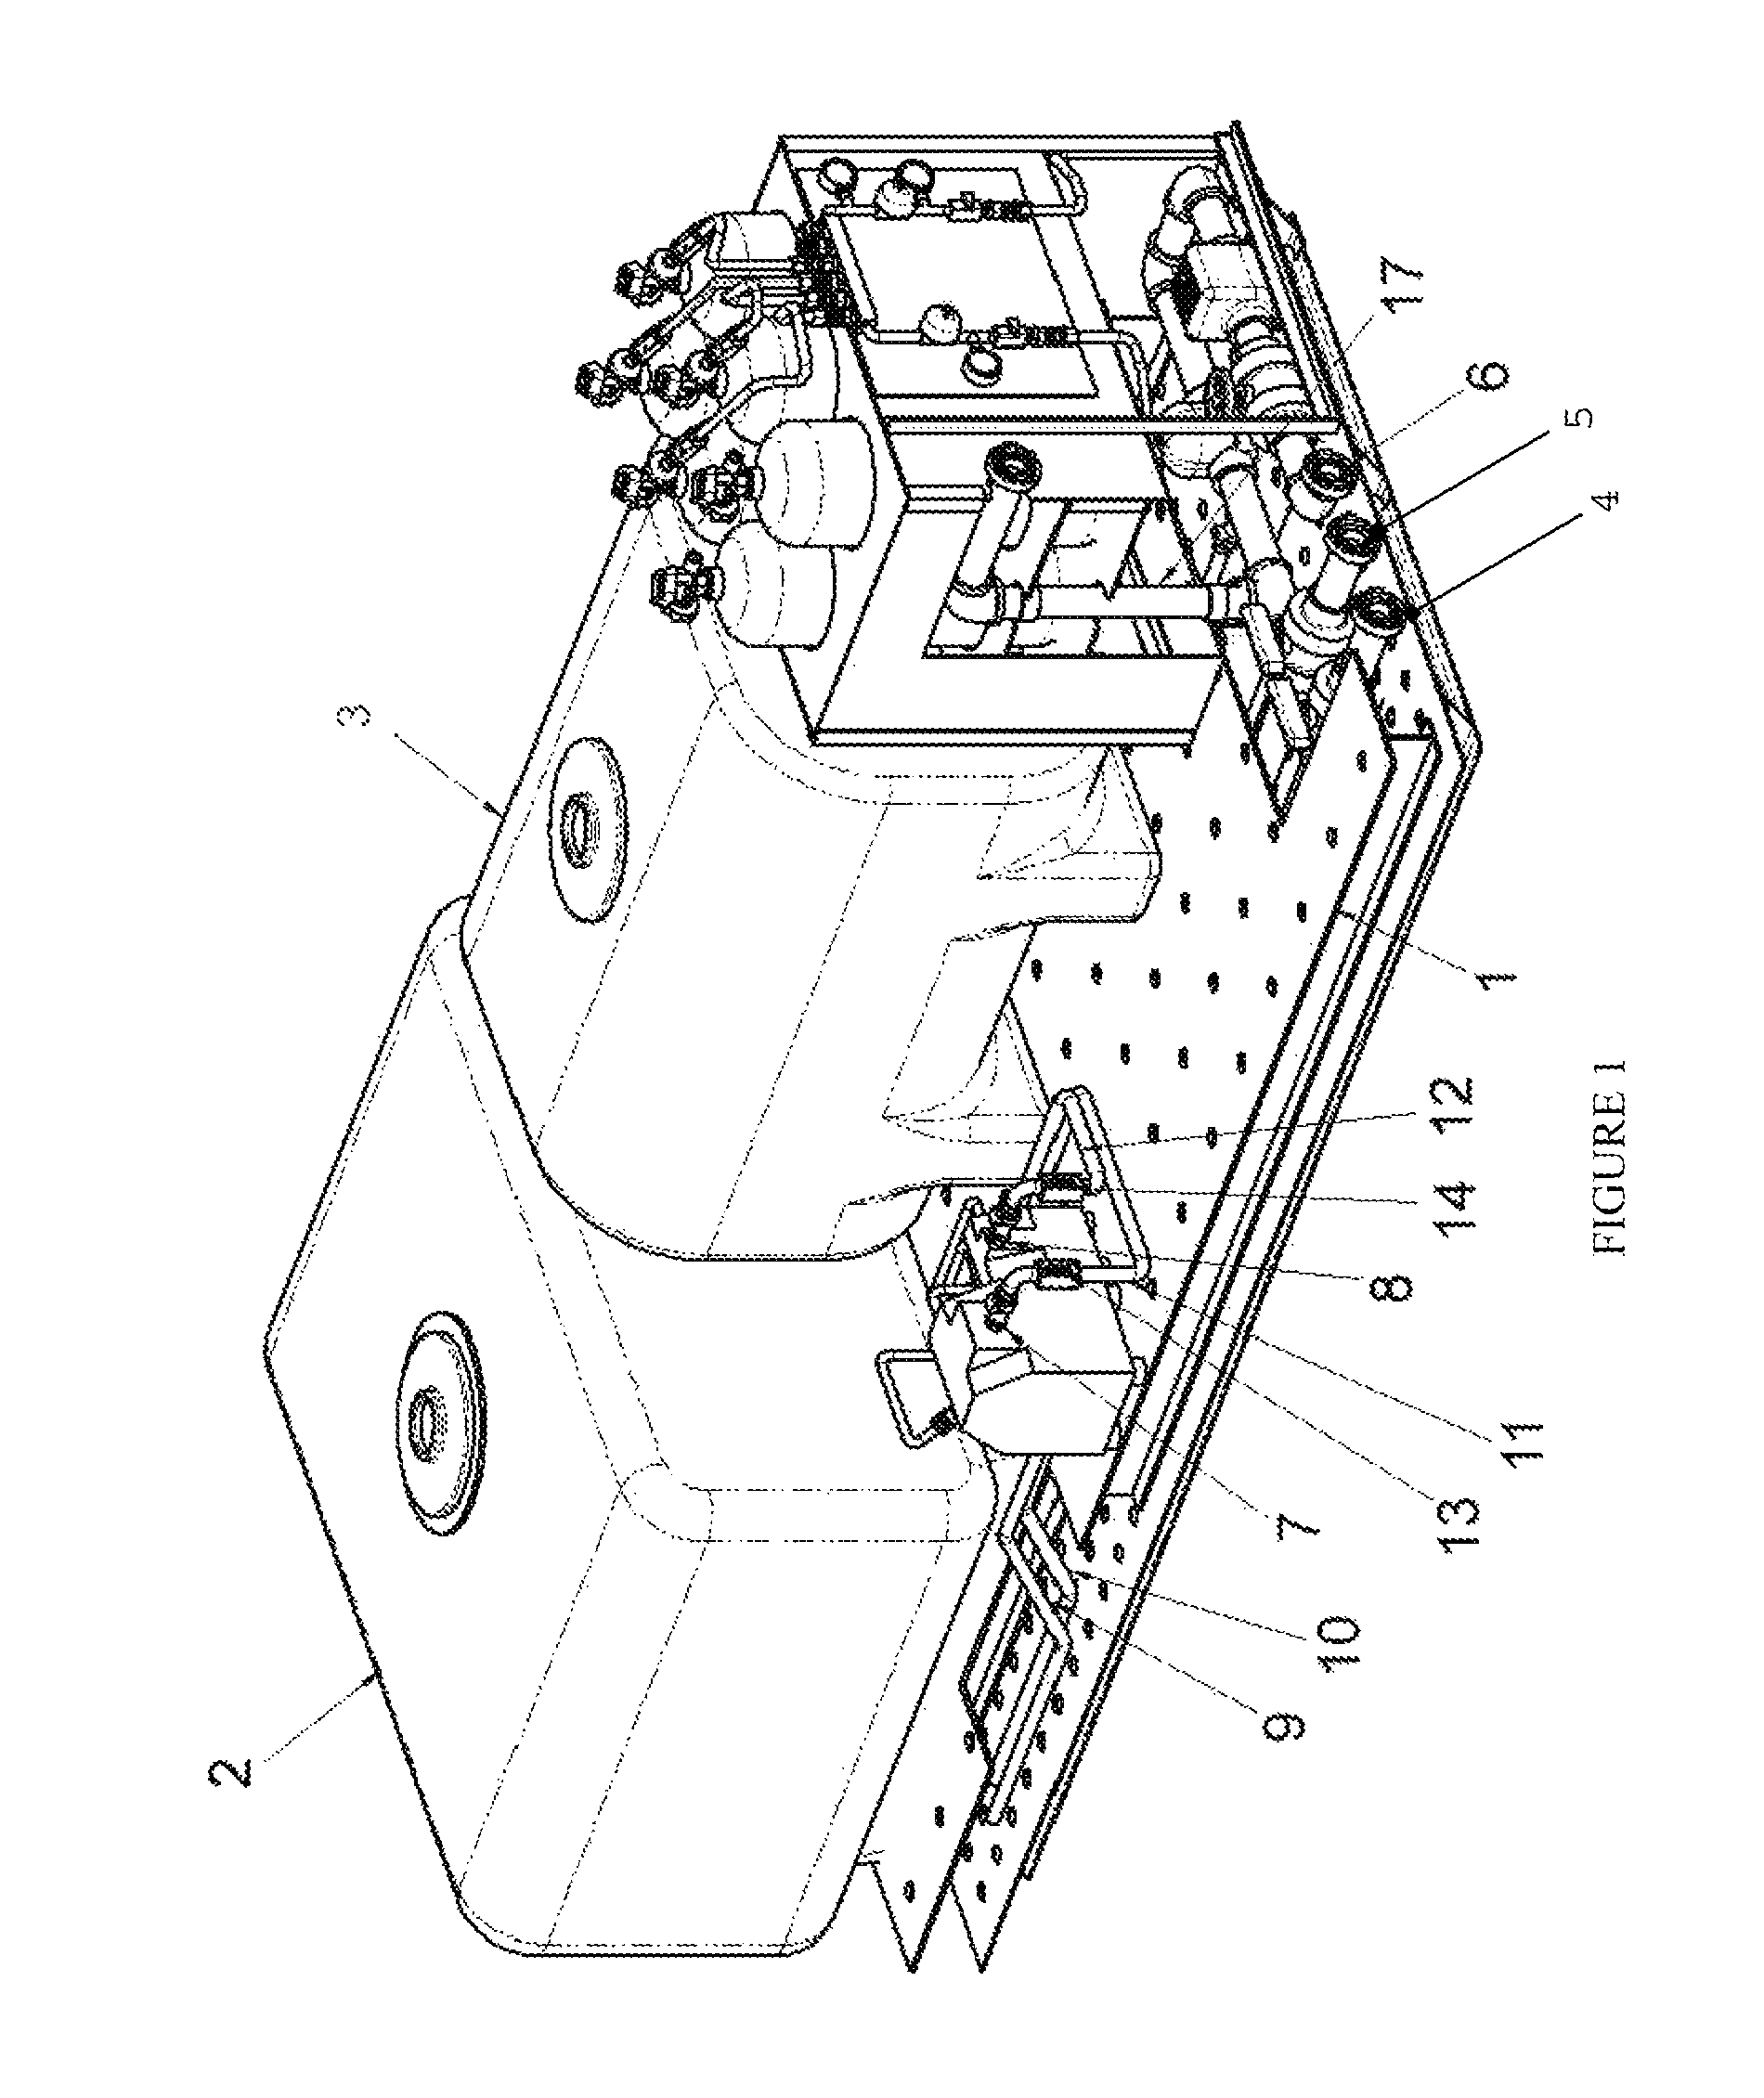 Method of, and apparatus for the dispensing of decontaminants and fire suppressant foam